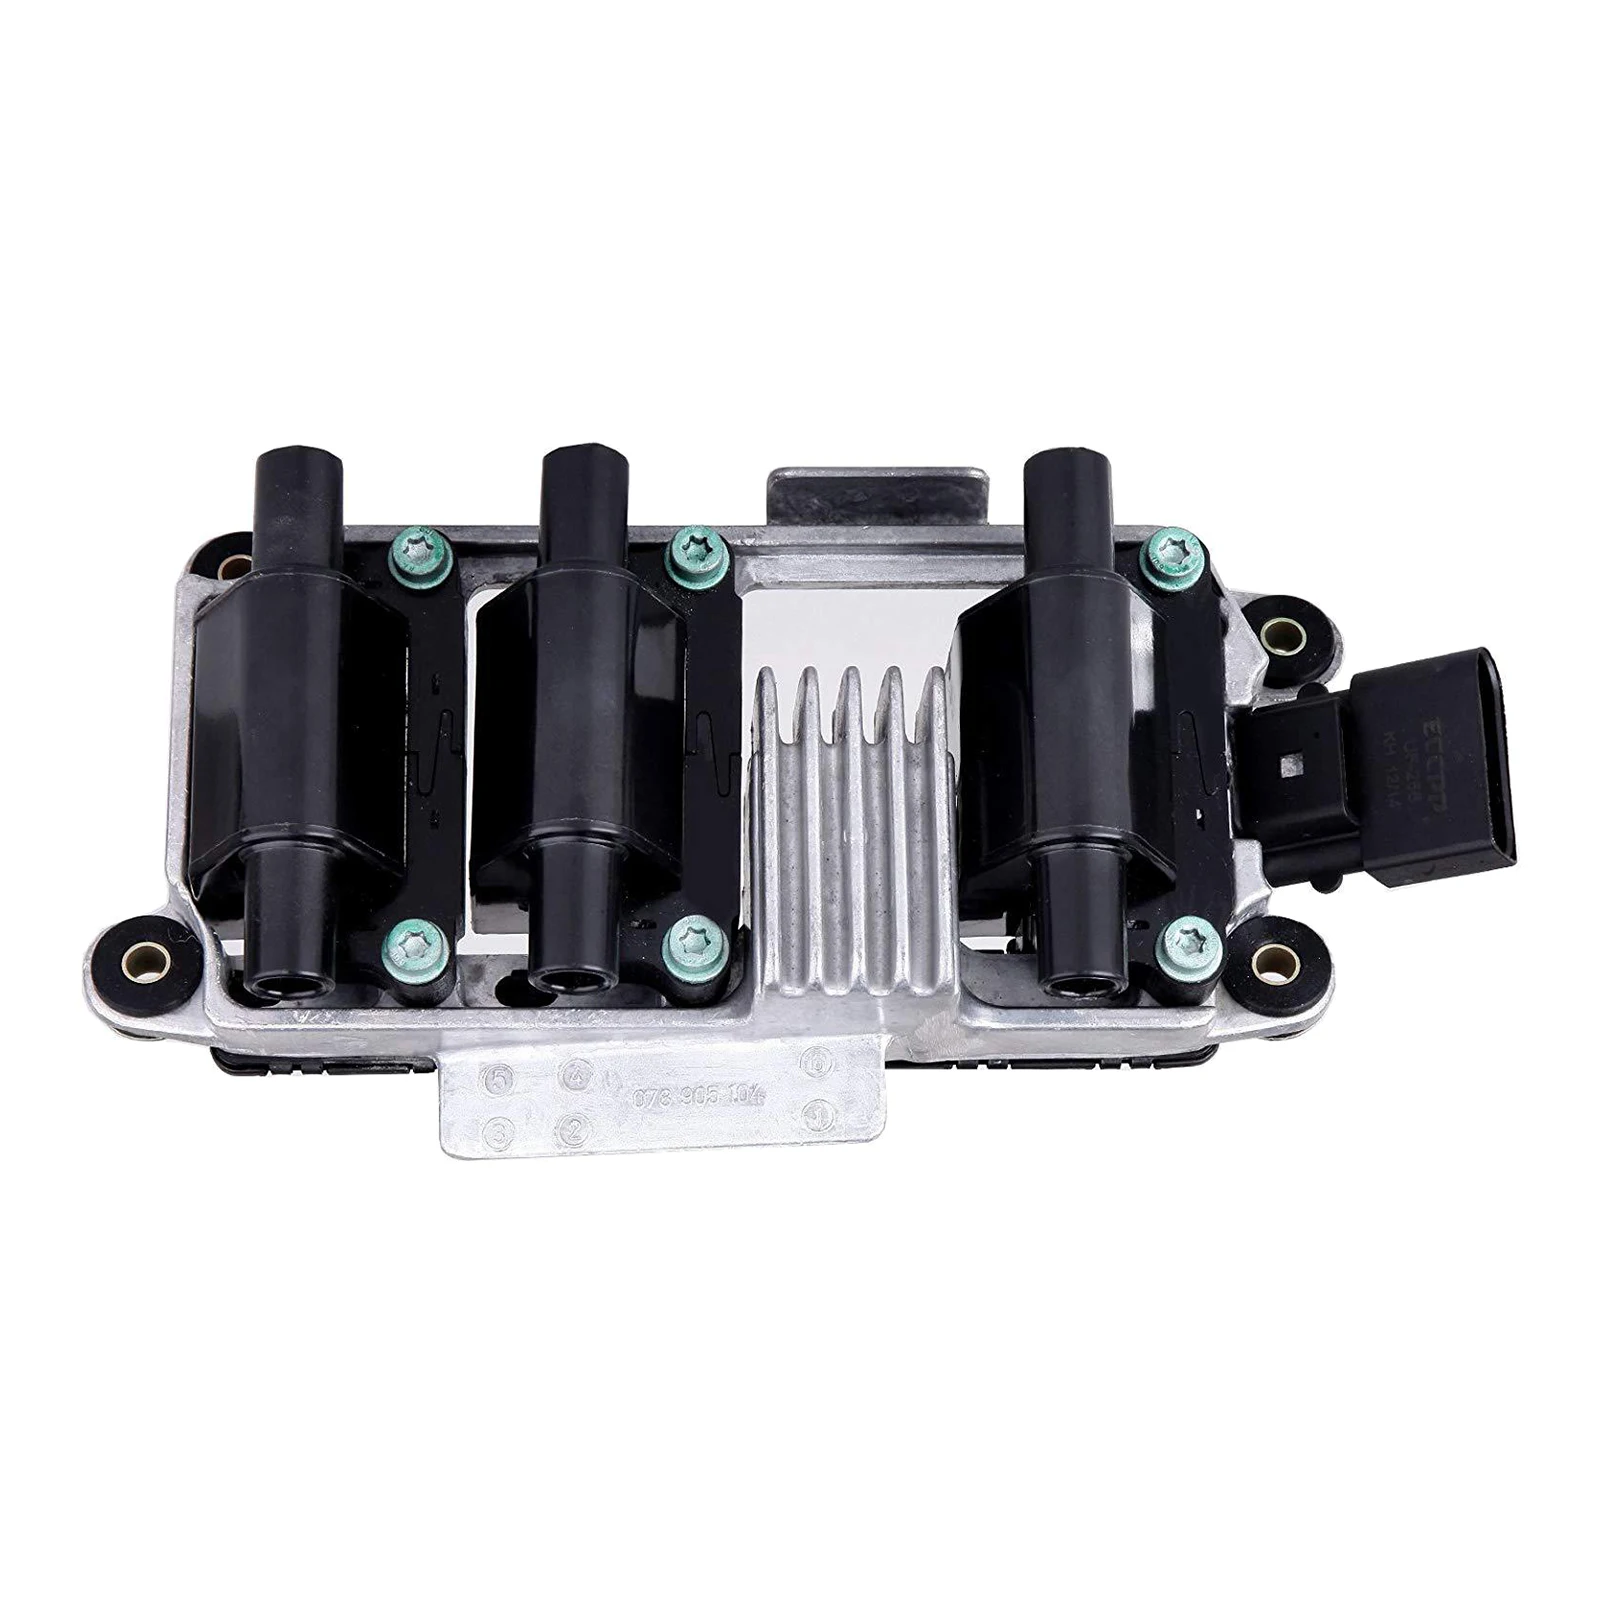 Ignition Coil Pack Replacement Fits for Audi A4 A6 97-01 for VW Passat 98-05 Car Accessory 078905104